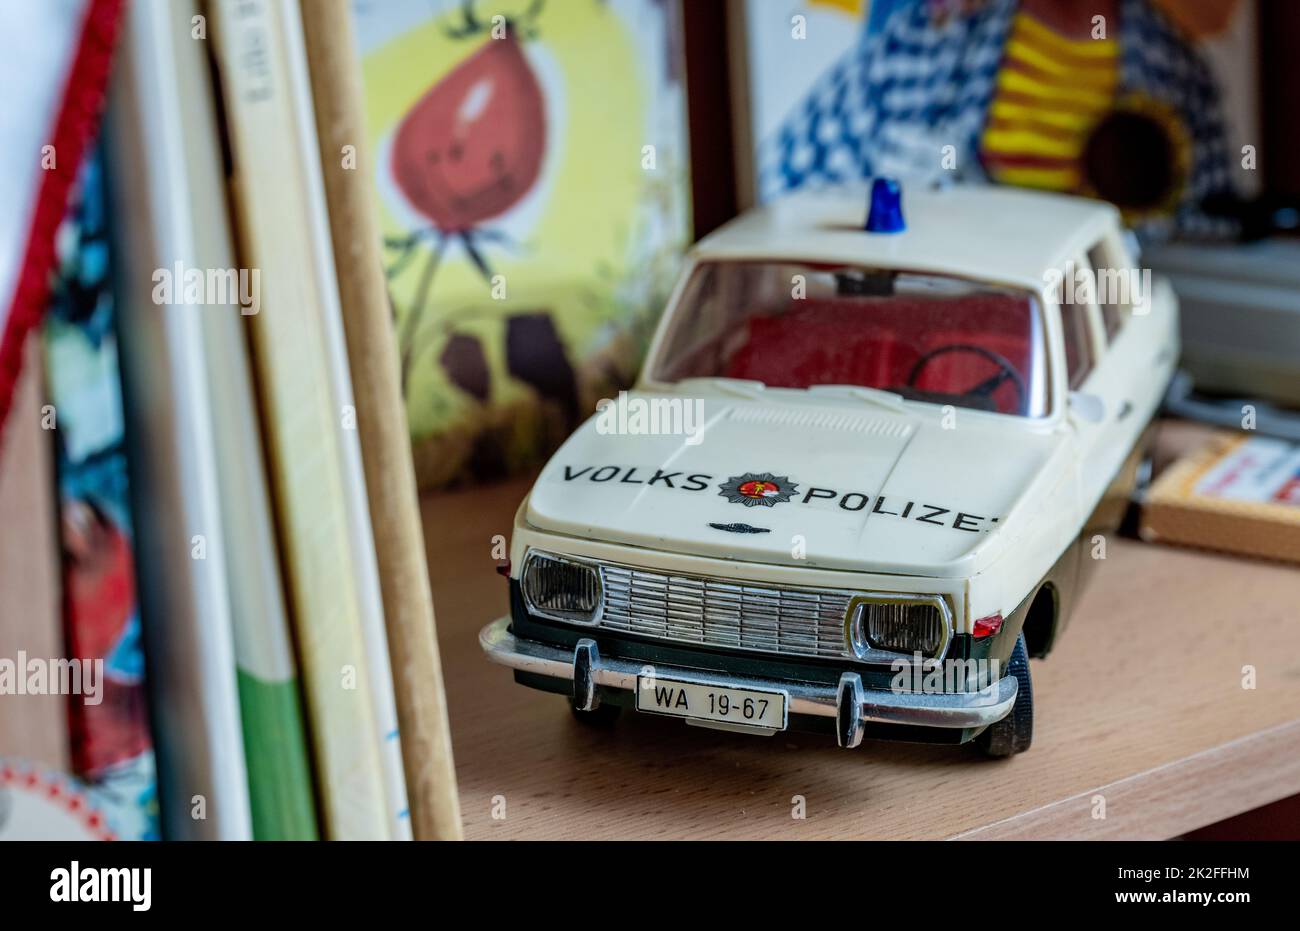 PRODUCTION - 21 September 2022, Saxony, Auerbach: A remote-controlled model Wartburg of the People's Police stands in a GDR children's room in the museum in Auerbach. This weekend, the GDR apartment set up in the Auerbach City Museum will open its door to visitors. A private collector had decided to make his treasures accessible to the public. He had previously collected the items in an 80-square-meter apartment belonging to the Auerbach housing cooperative. The show is based on a new GDR apartment built in the 1980s. On a tour through the living room, bathroom, children's room and kitchen, vi Stock Photo